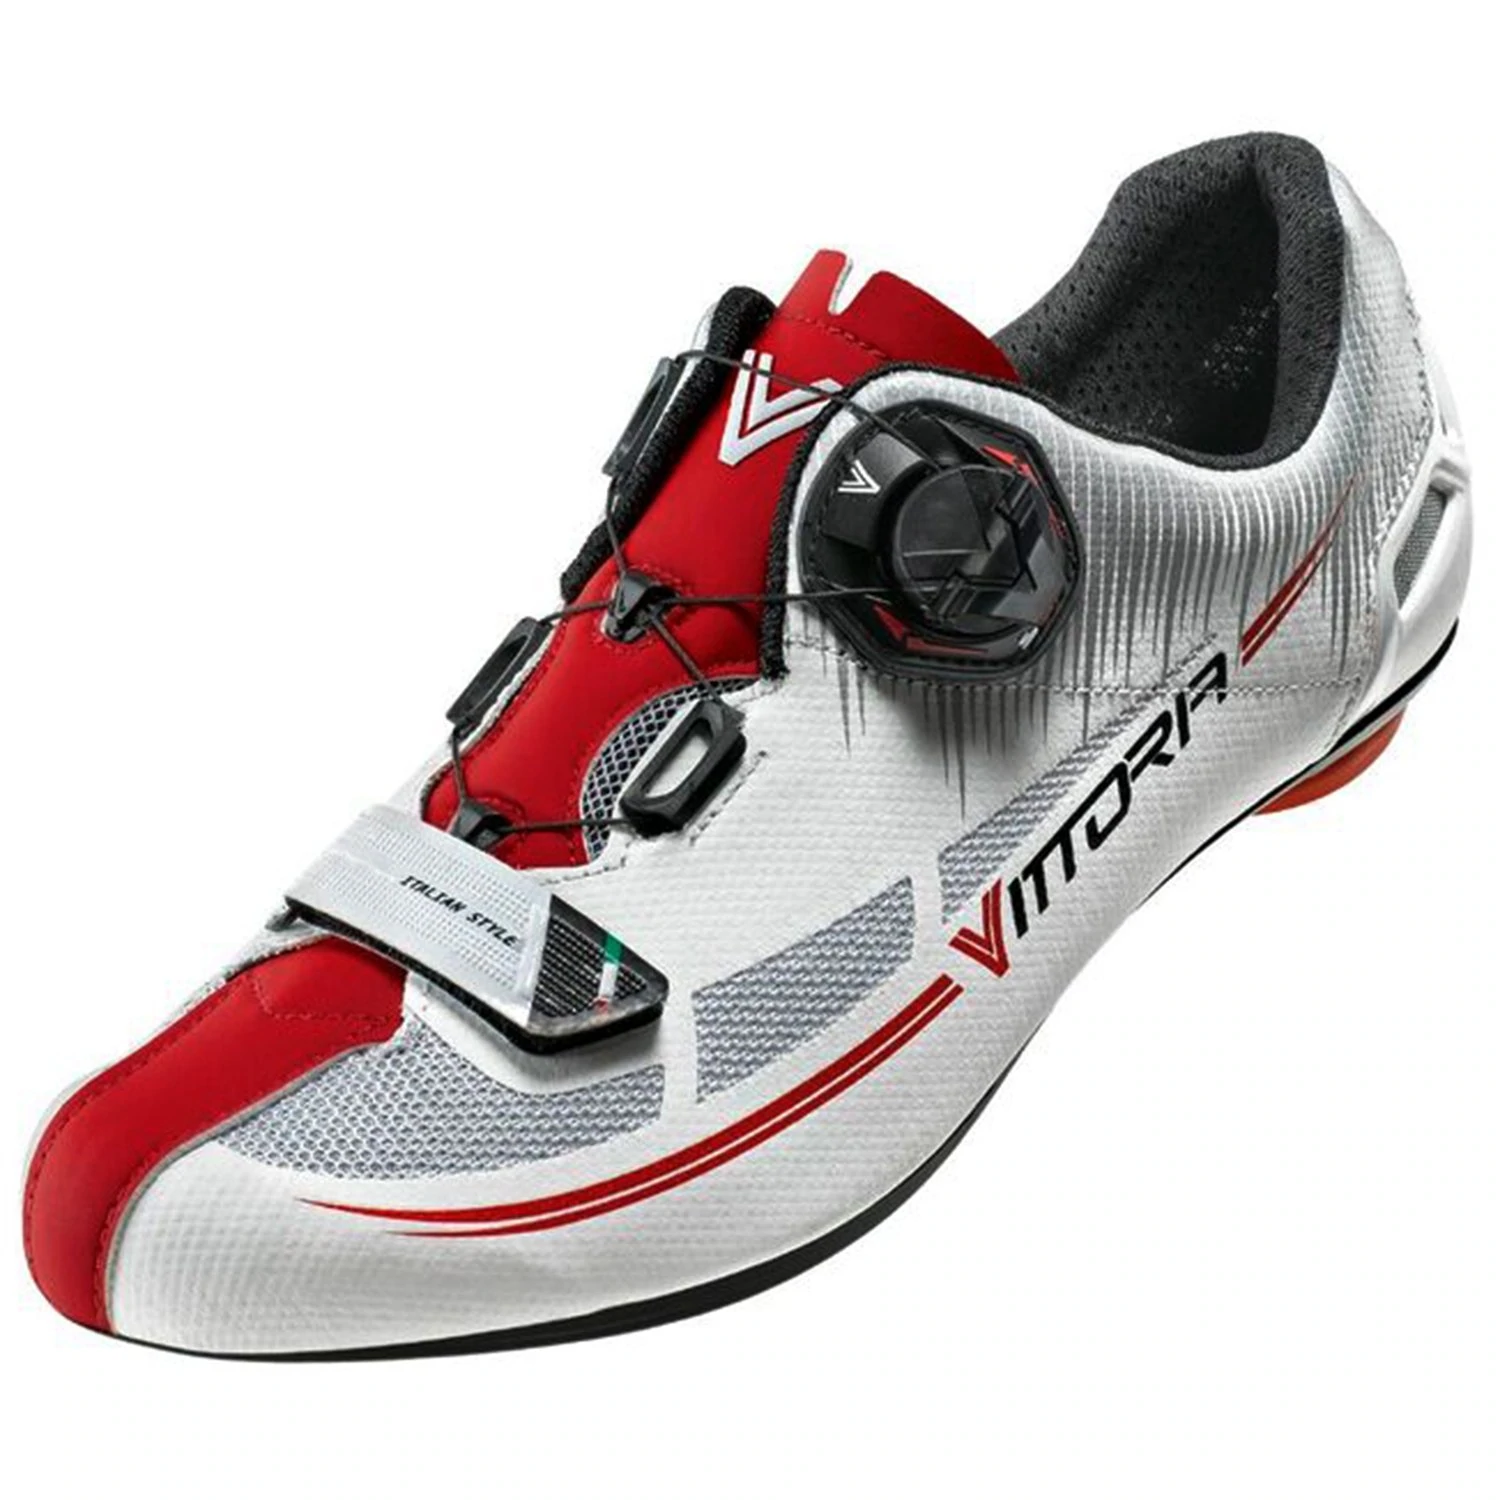 VITTORIA ROAD CYCLING SHOES NYLON SOLE FUSION RED-WHITE - Bycyclistshub |  BIKE ACCESSORIES STORE